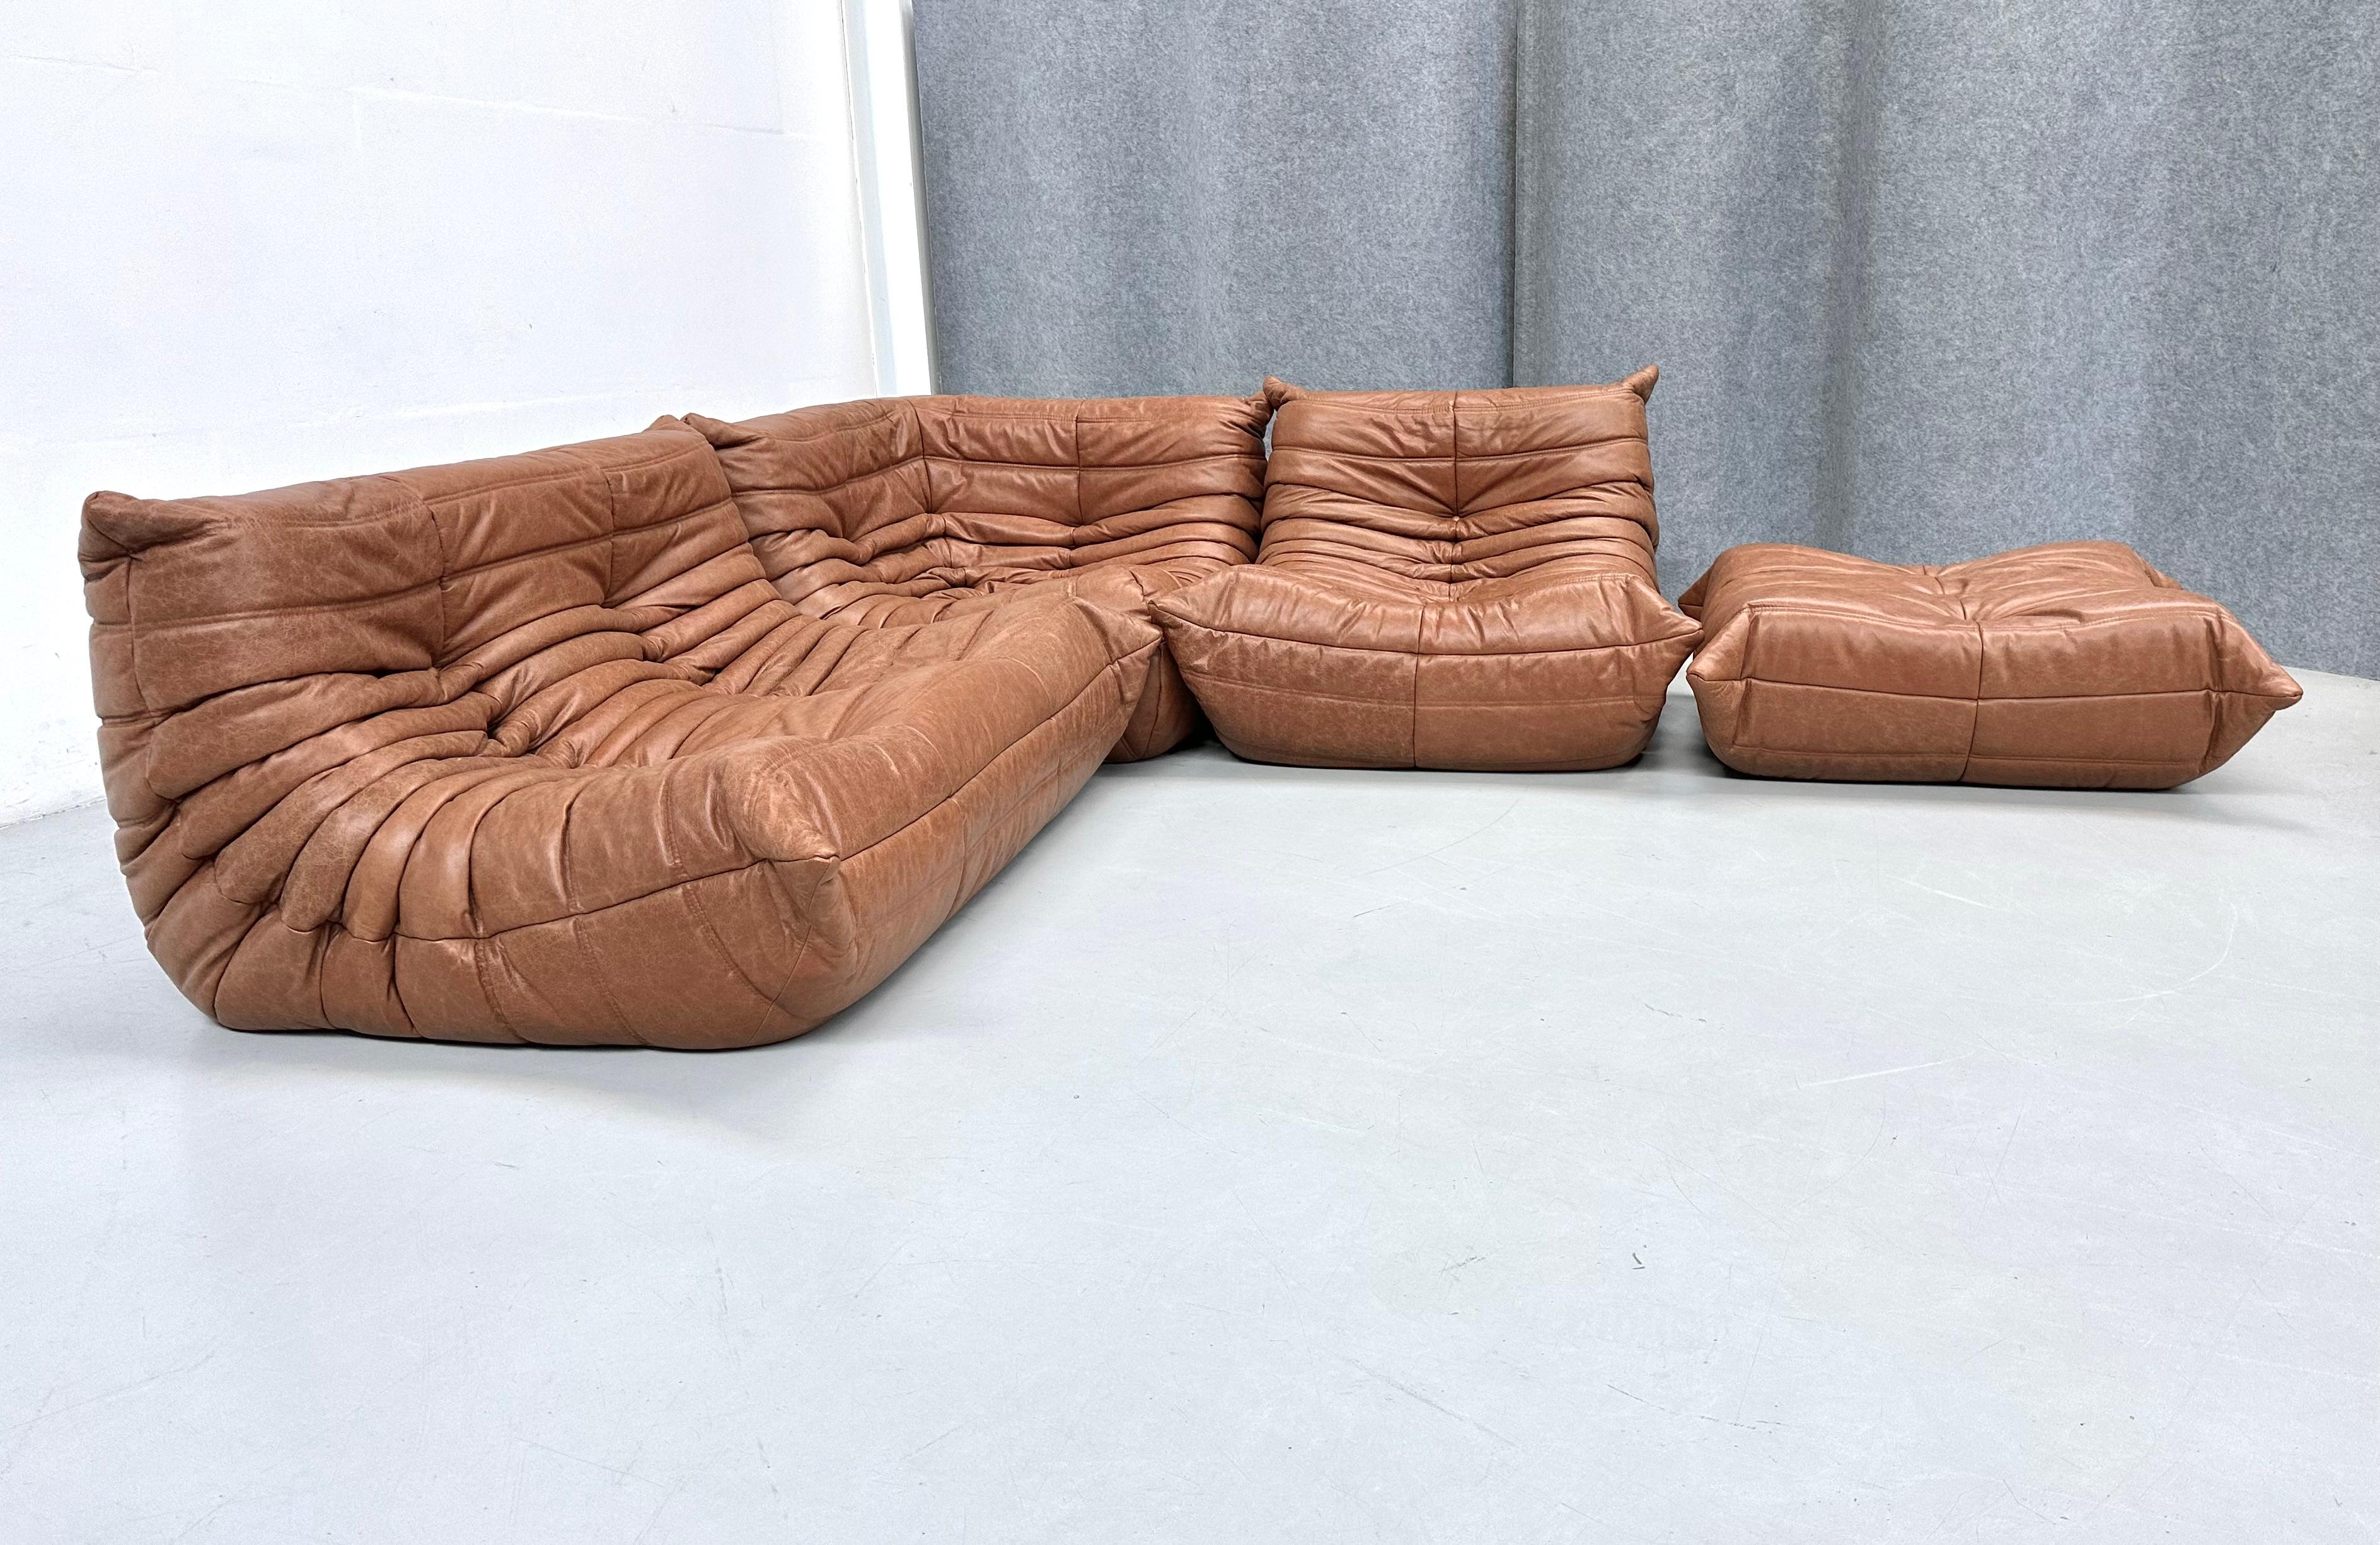 The Togo was designed by Michel Ducaroy in 1973 for Ligne Roset. It is the first sofa/chair ever made only of foam and leather. The Togo collection features an ergonomic design with polyether foam construction and padded covers, making the Togo both